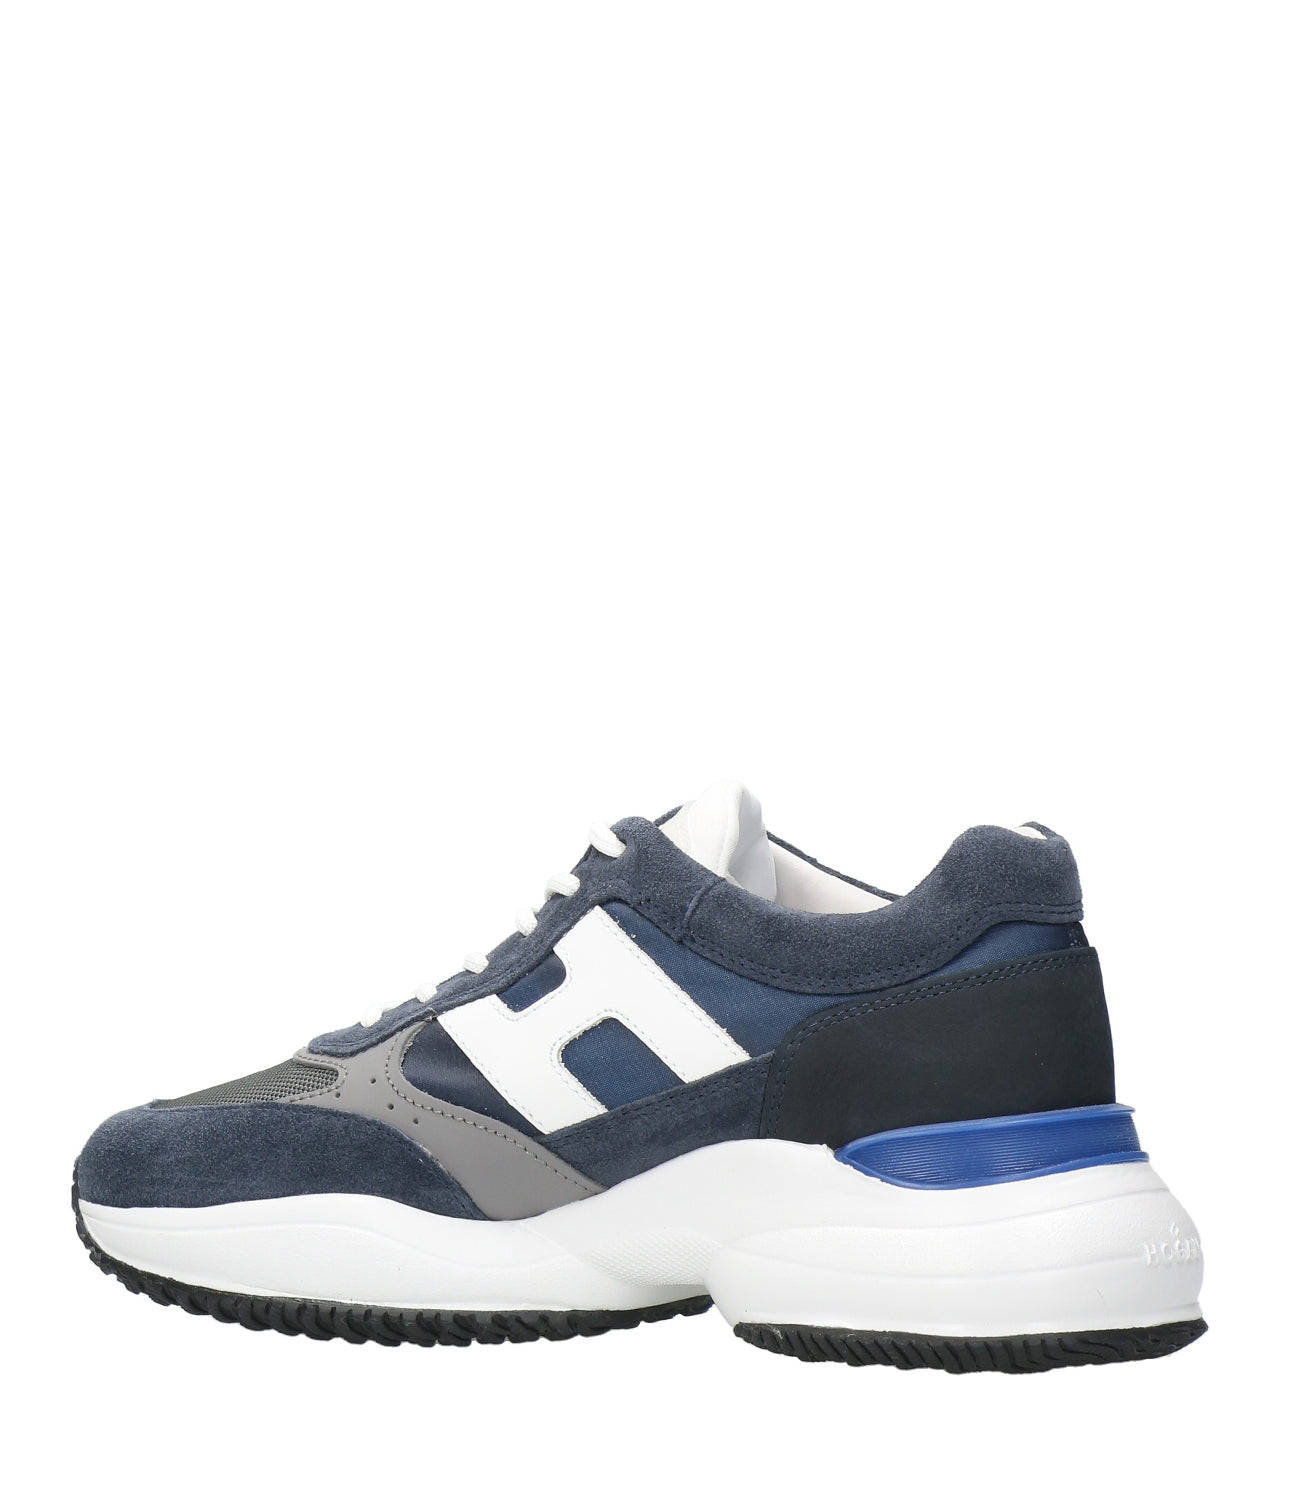 Hogan | Sneakers Interaction Lace-up Blue and White